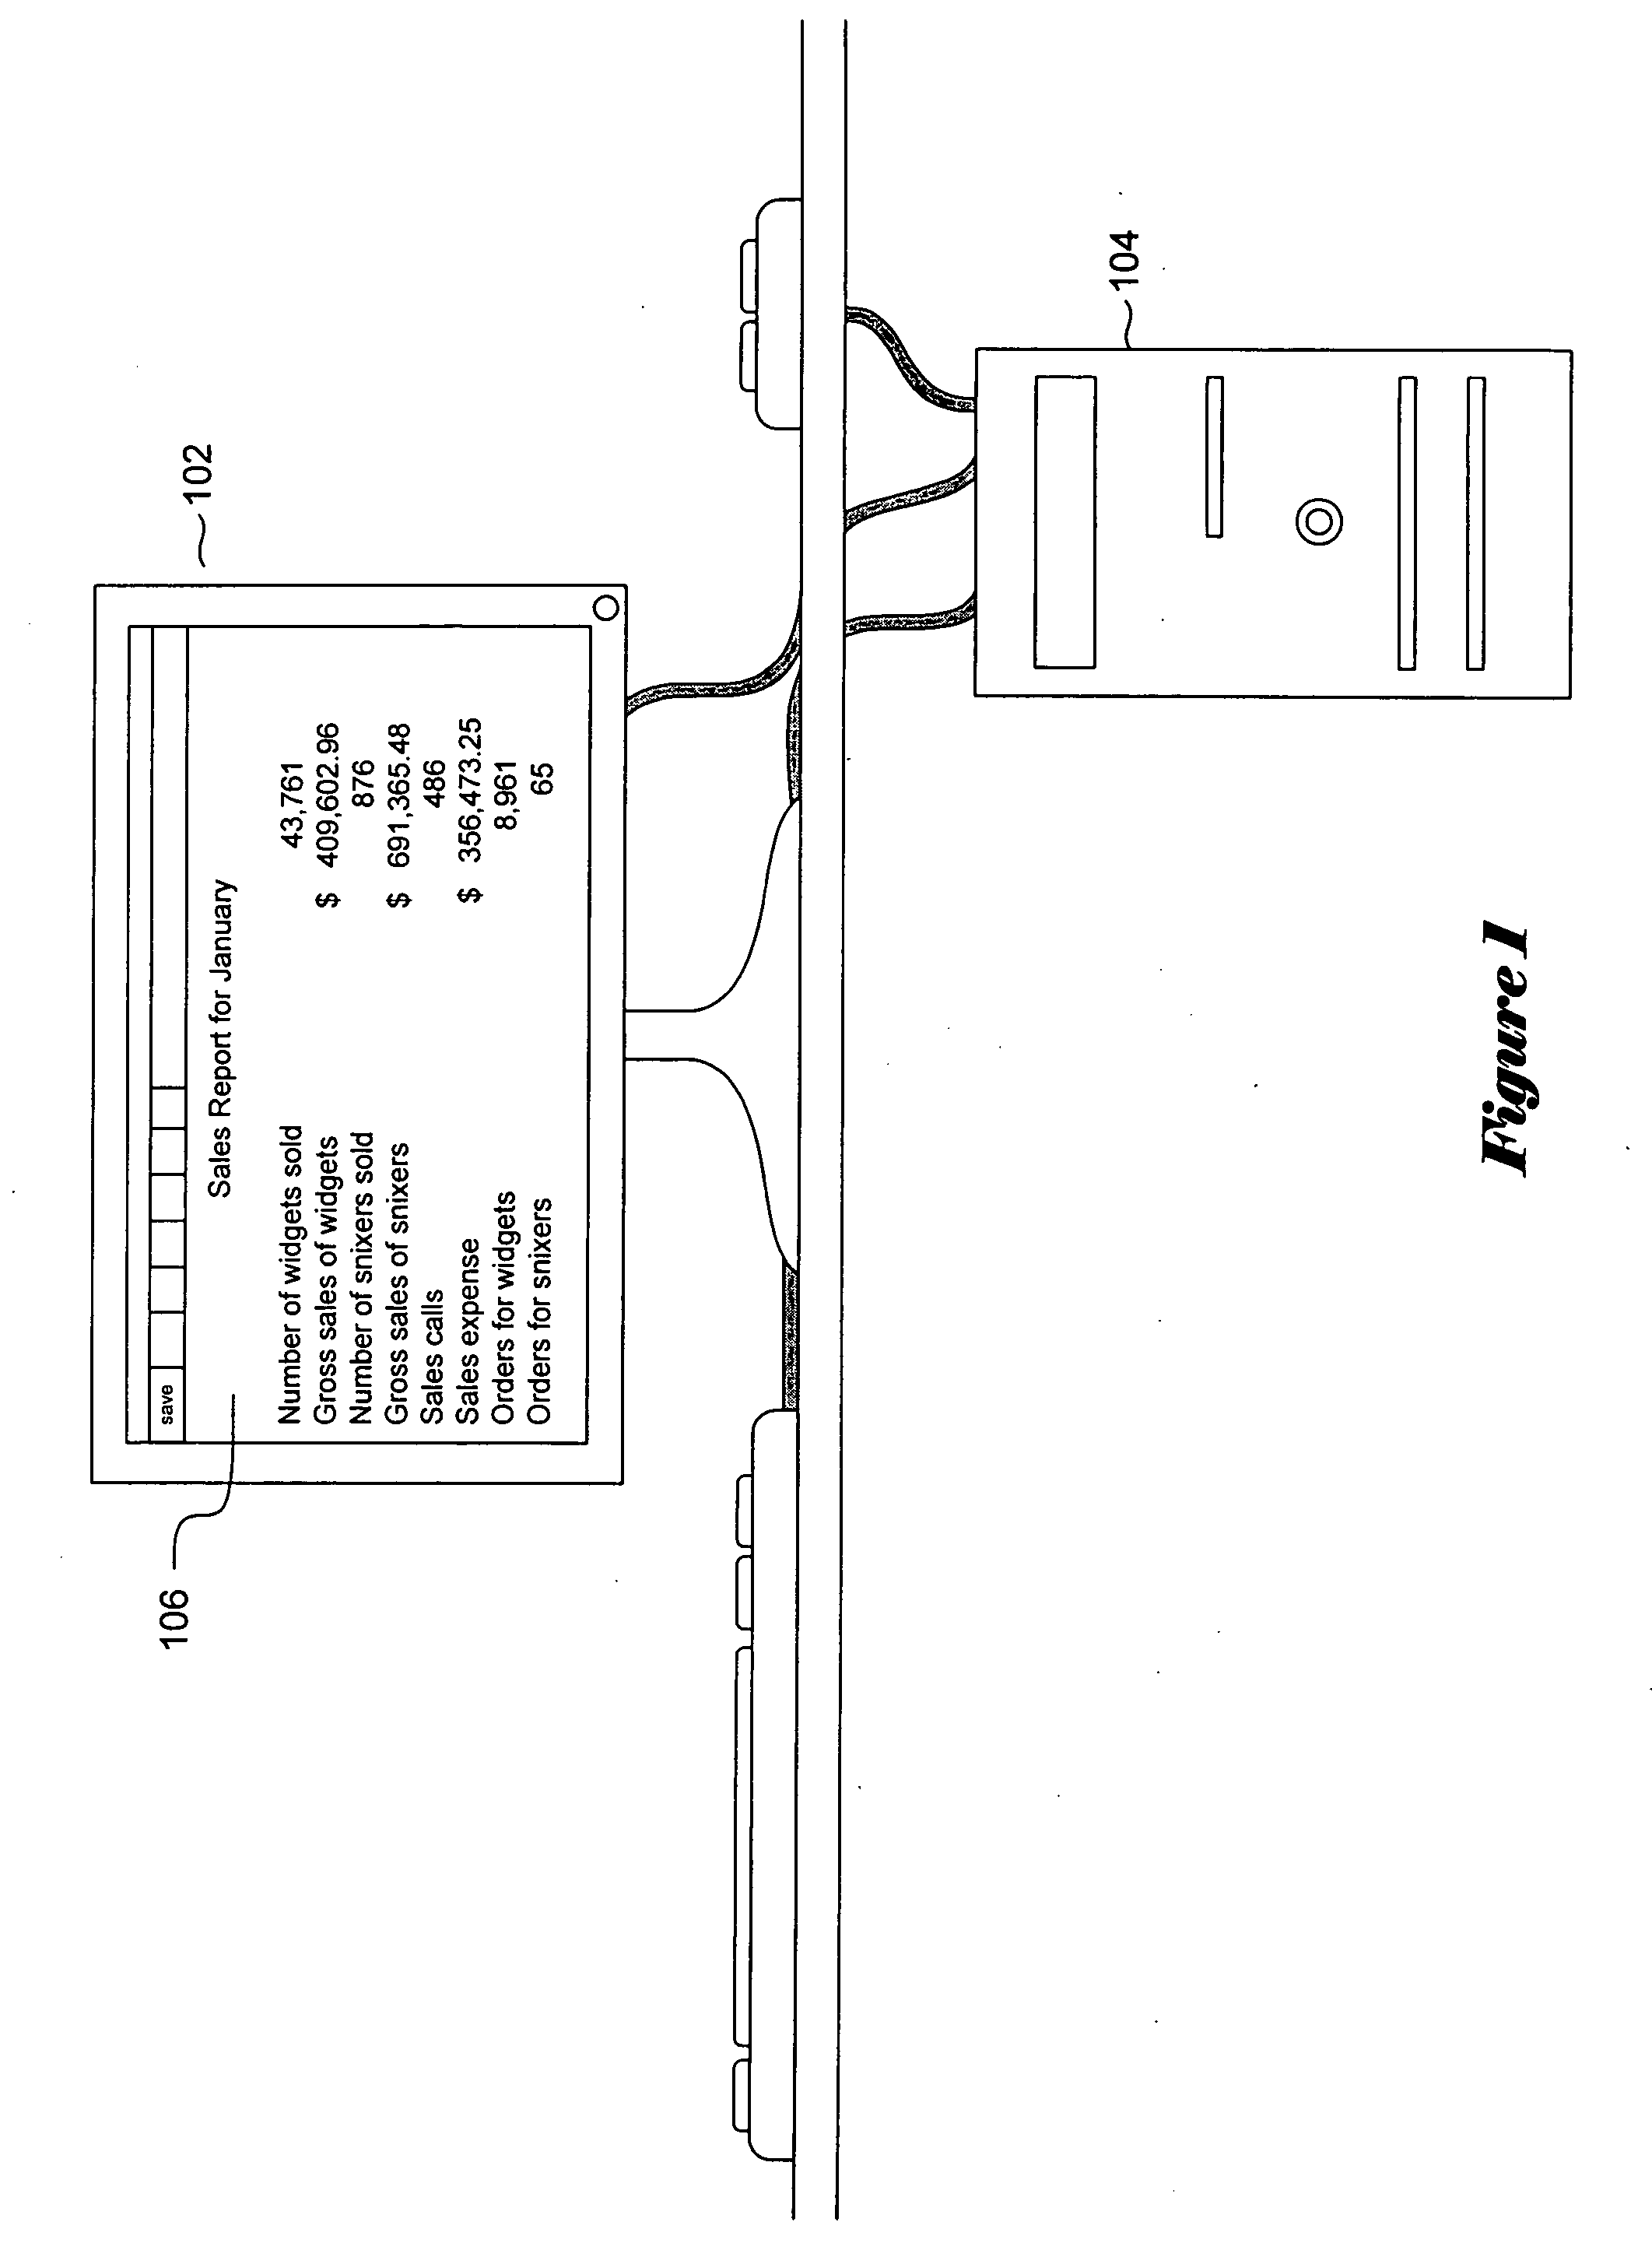 Data-object-related-request routing in a dynamic, distributed data-storage system